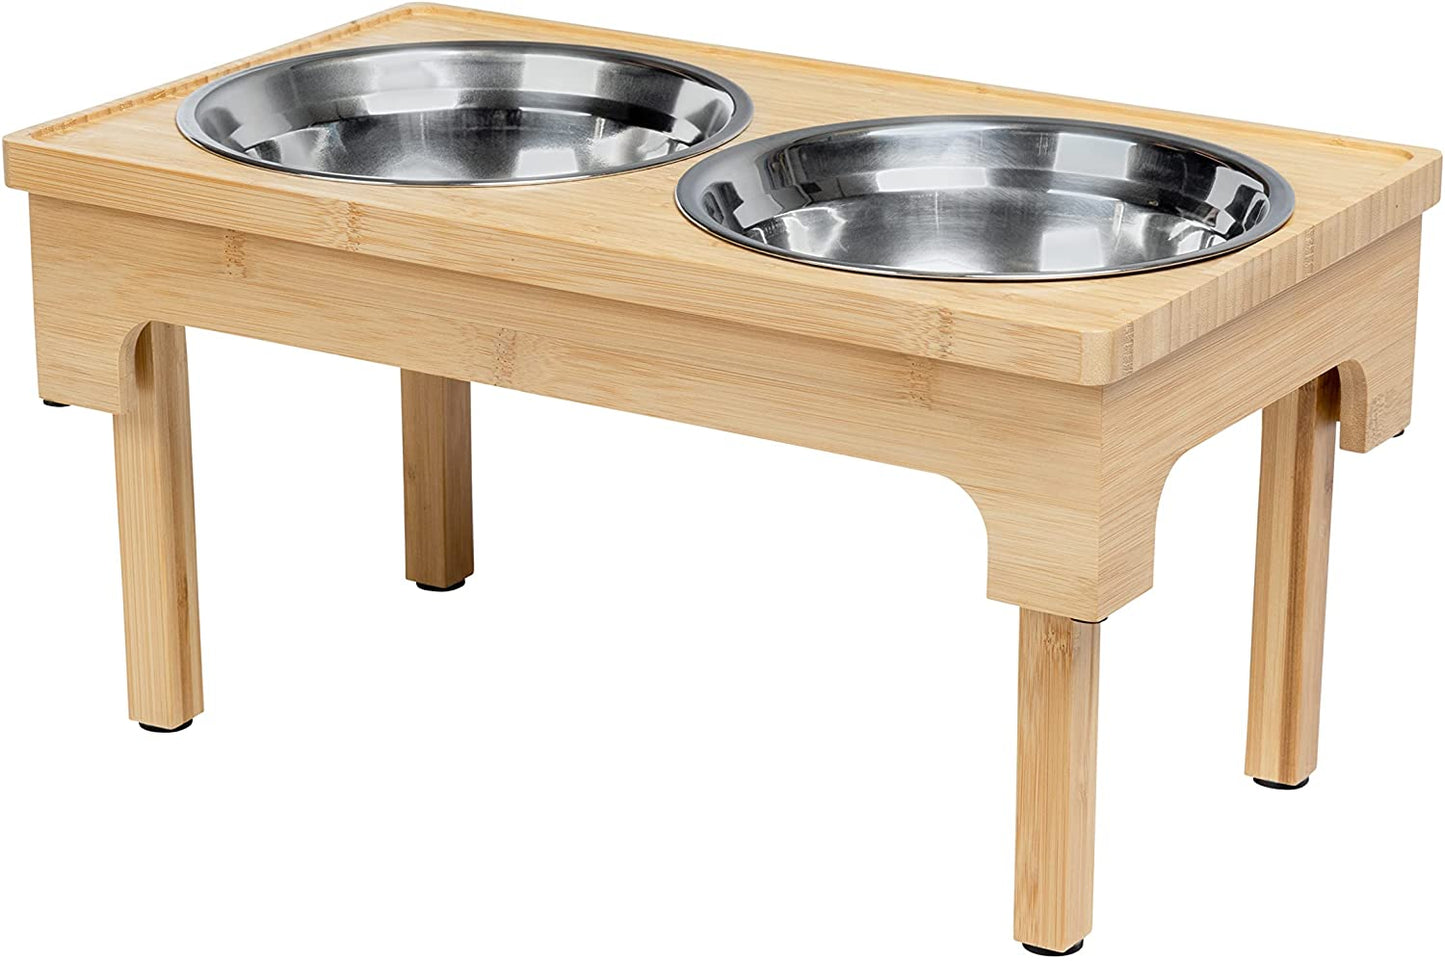 Downtown Pet Supply Adjustable Bamboo Elevated Pet Feeder, Raised X-Large Stainless Steel Durable Food and Water Bowls for Dogs and Cats (3", 8", and 12" Heights)